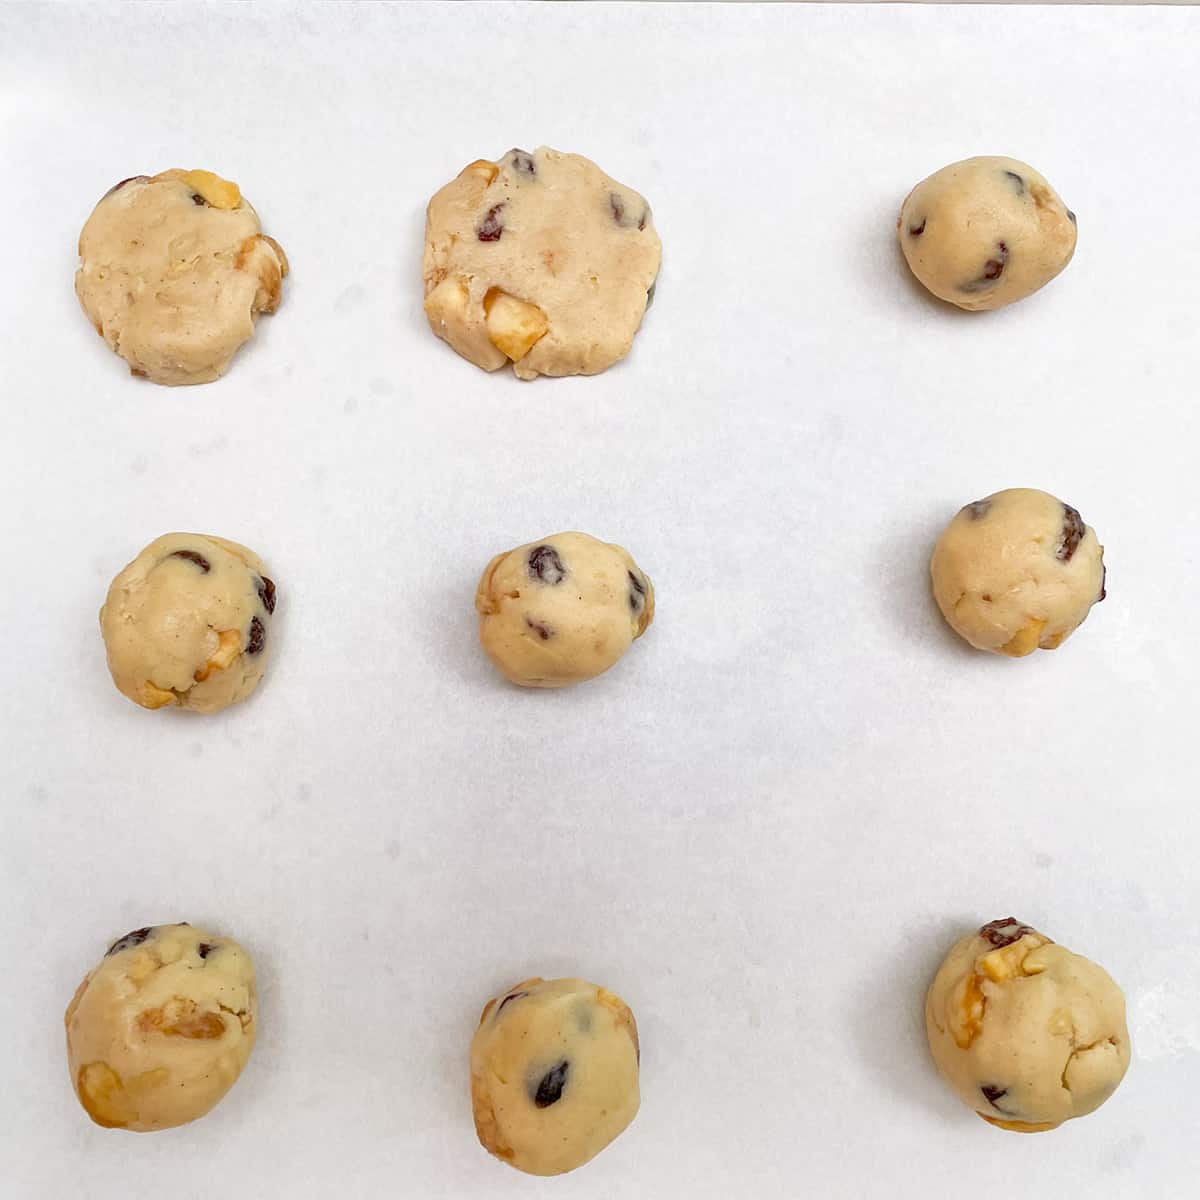 Showing nine cookie balls where two of them have been flattened.